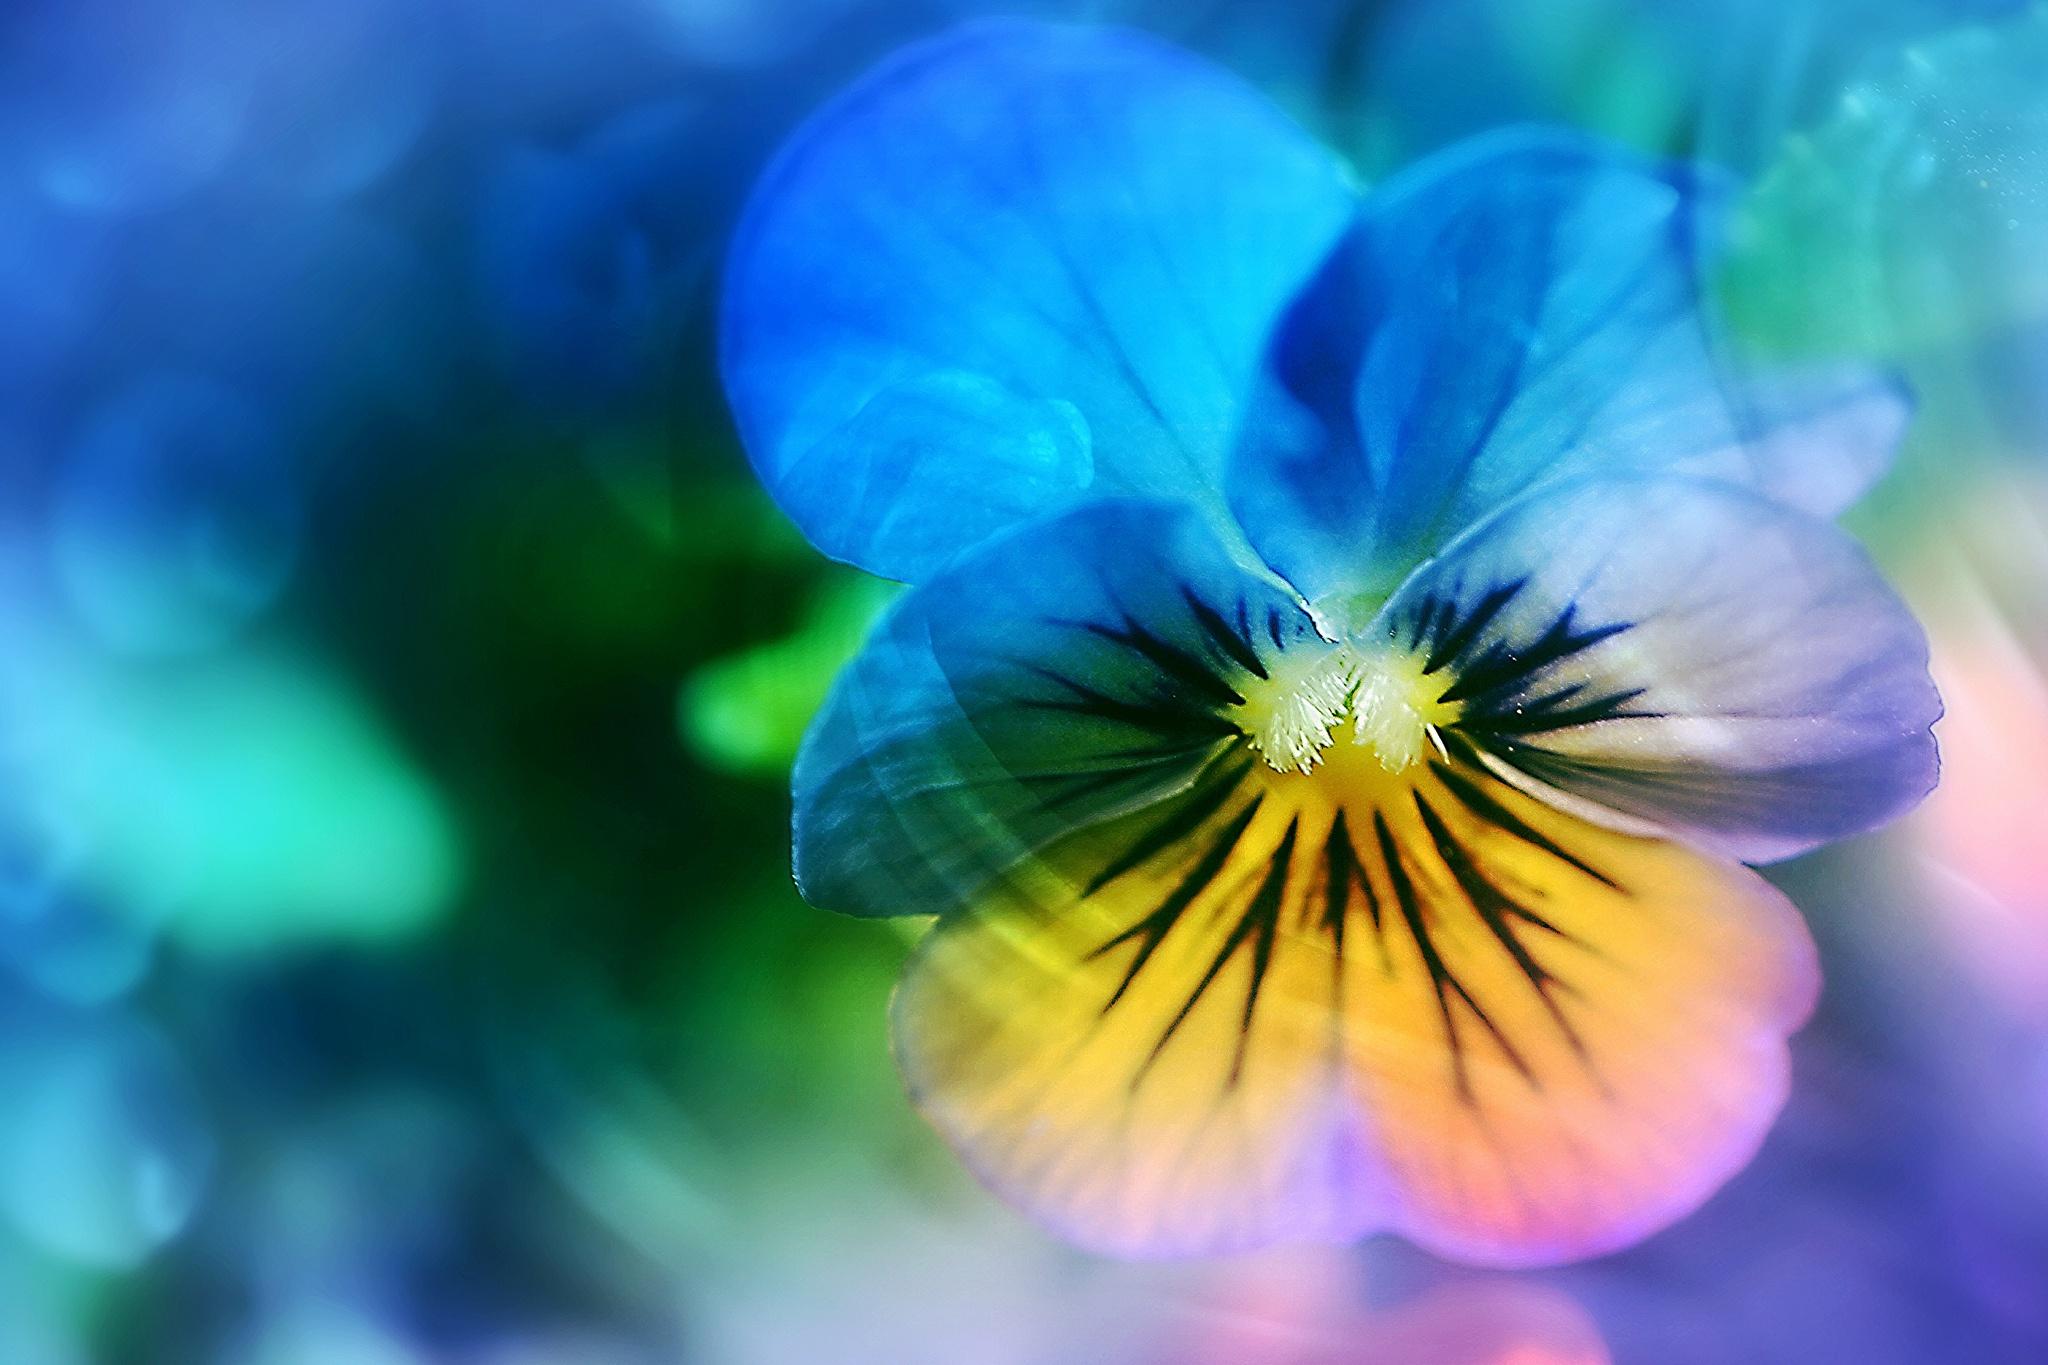 Pansy Flower, HD Flowers, 4k Wallpaper, Image, Background, Photo